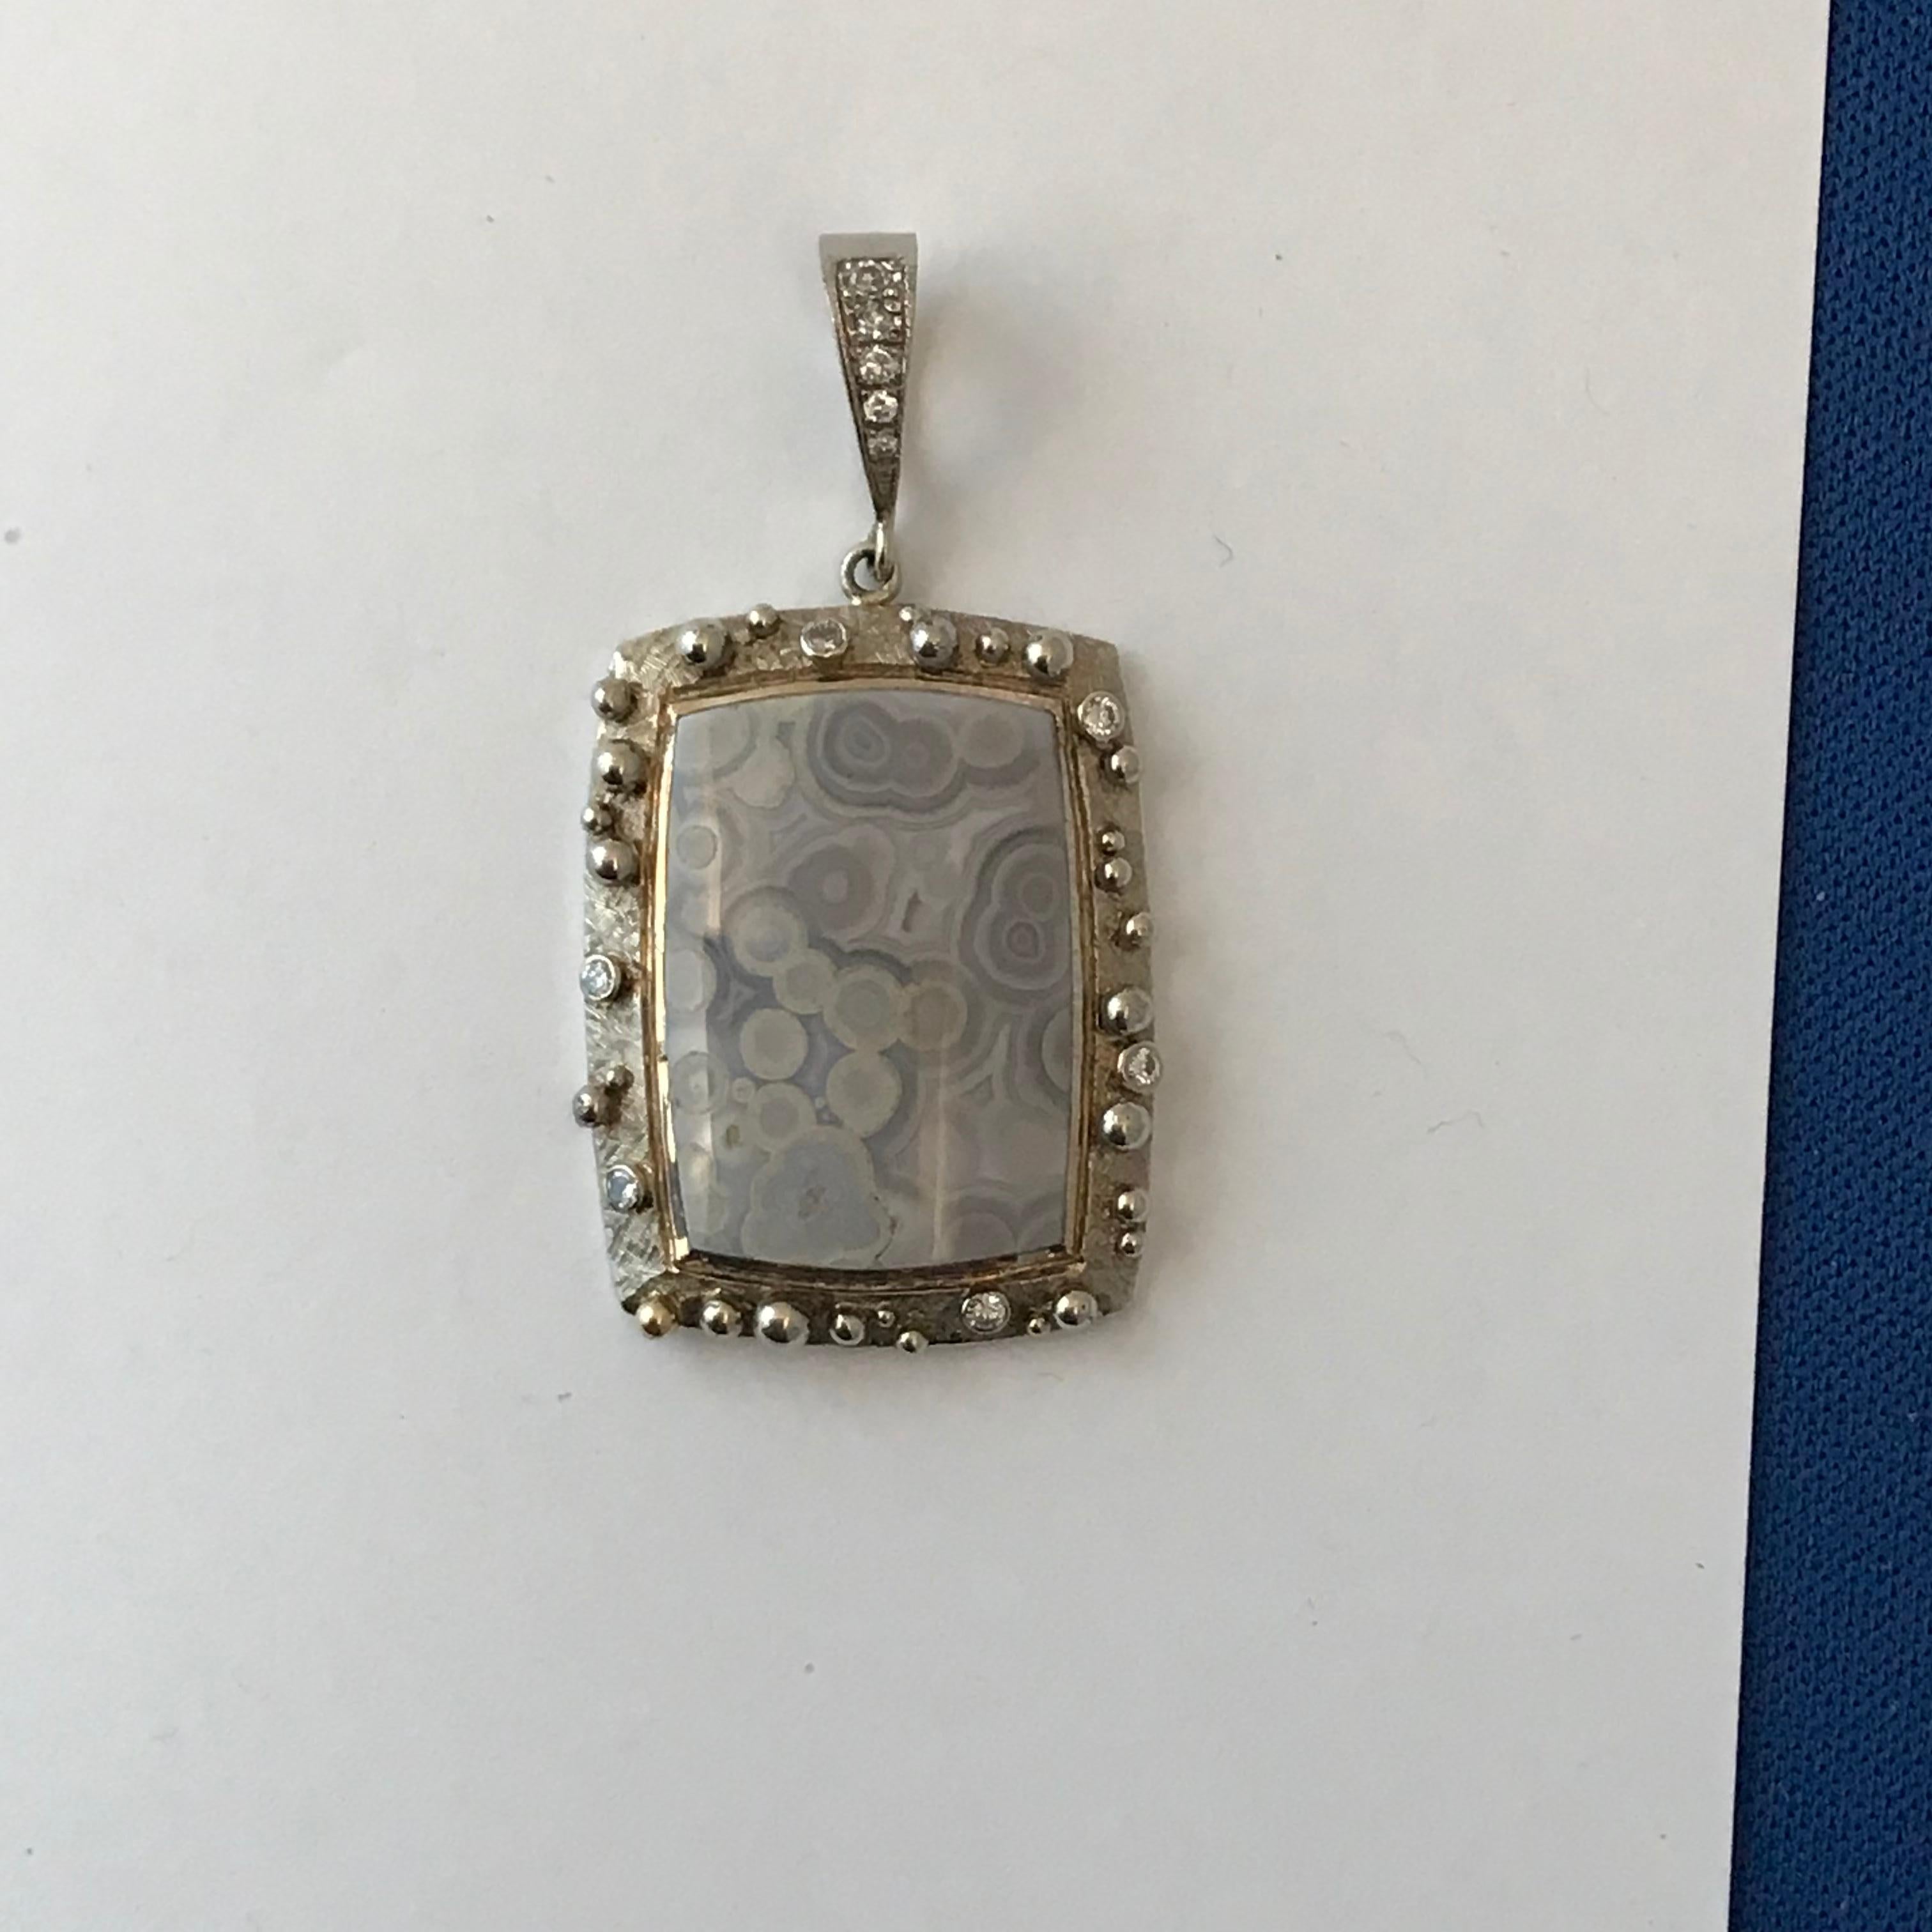 Tube Agate Pendant With .21 Carats Diamonds in 14 K White Gold

This pendant is made from 14k white gold and features a Grey Tube Agate . Diamonds are .21 cts total weight. It is 100% natural in color nothing about it has been changed. Nature does